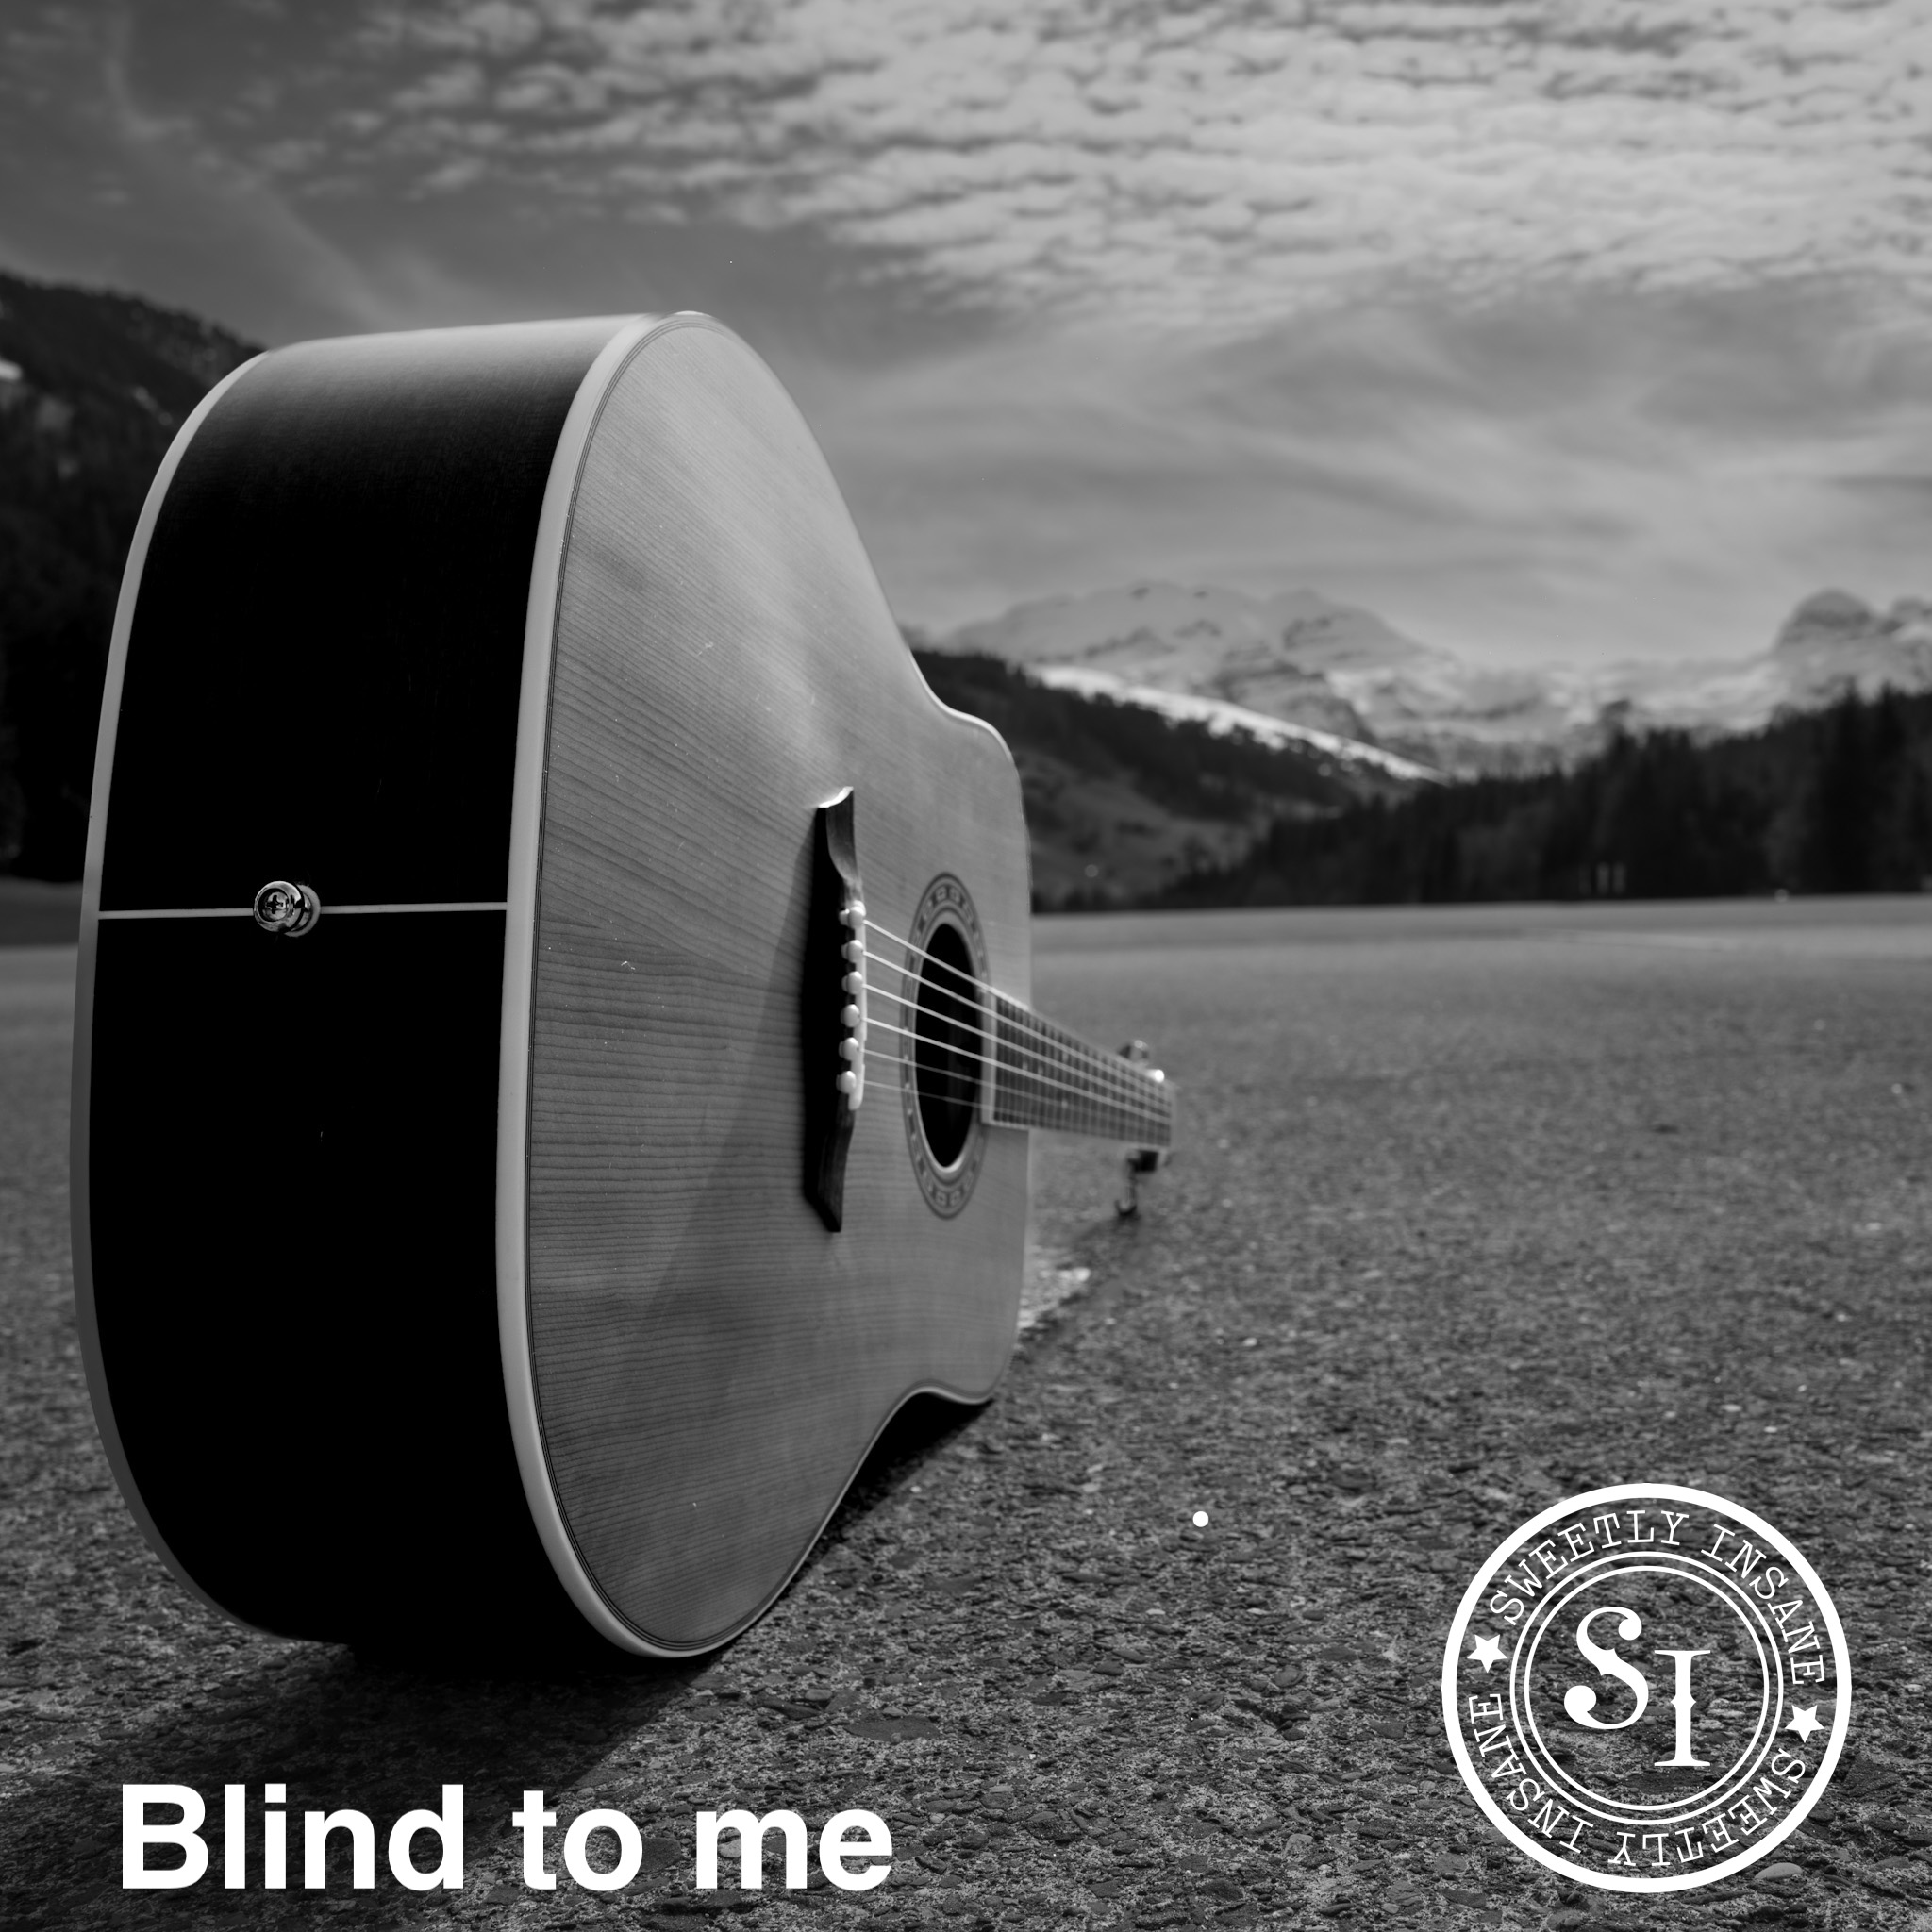 New Song "Blind to me" coming soon...